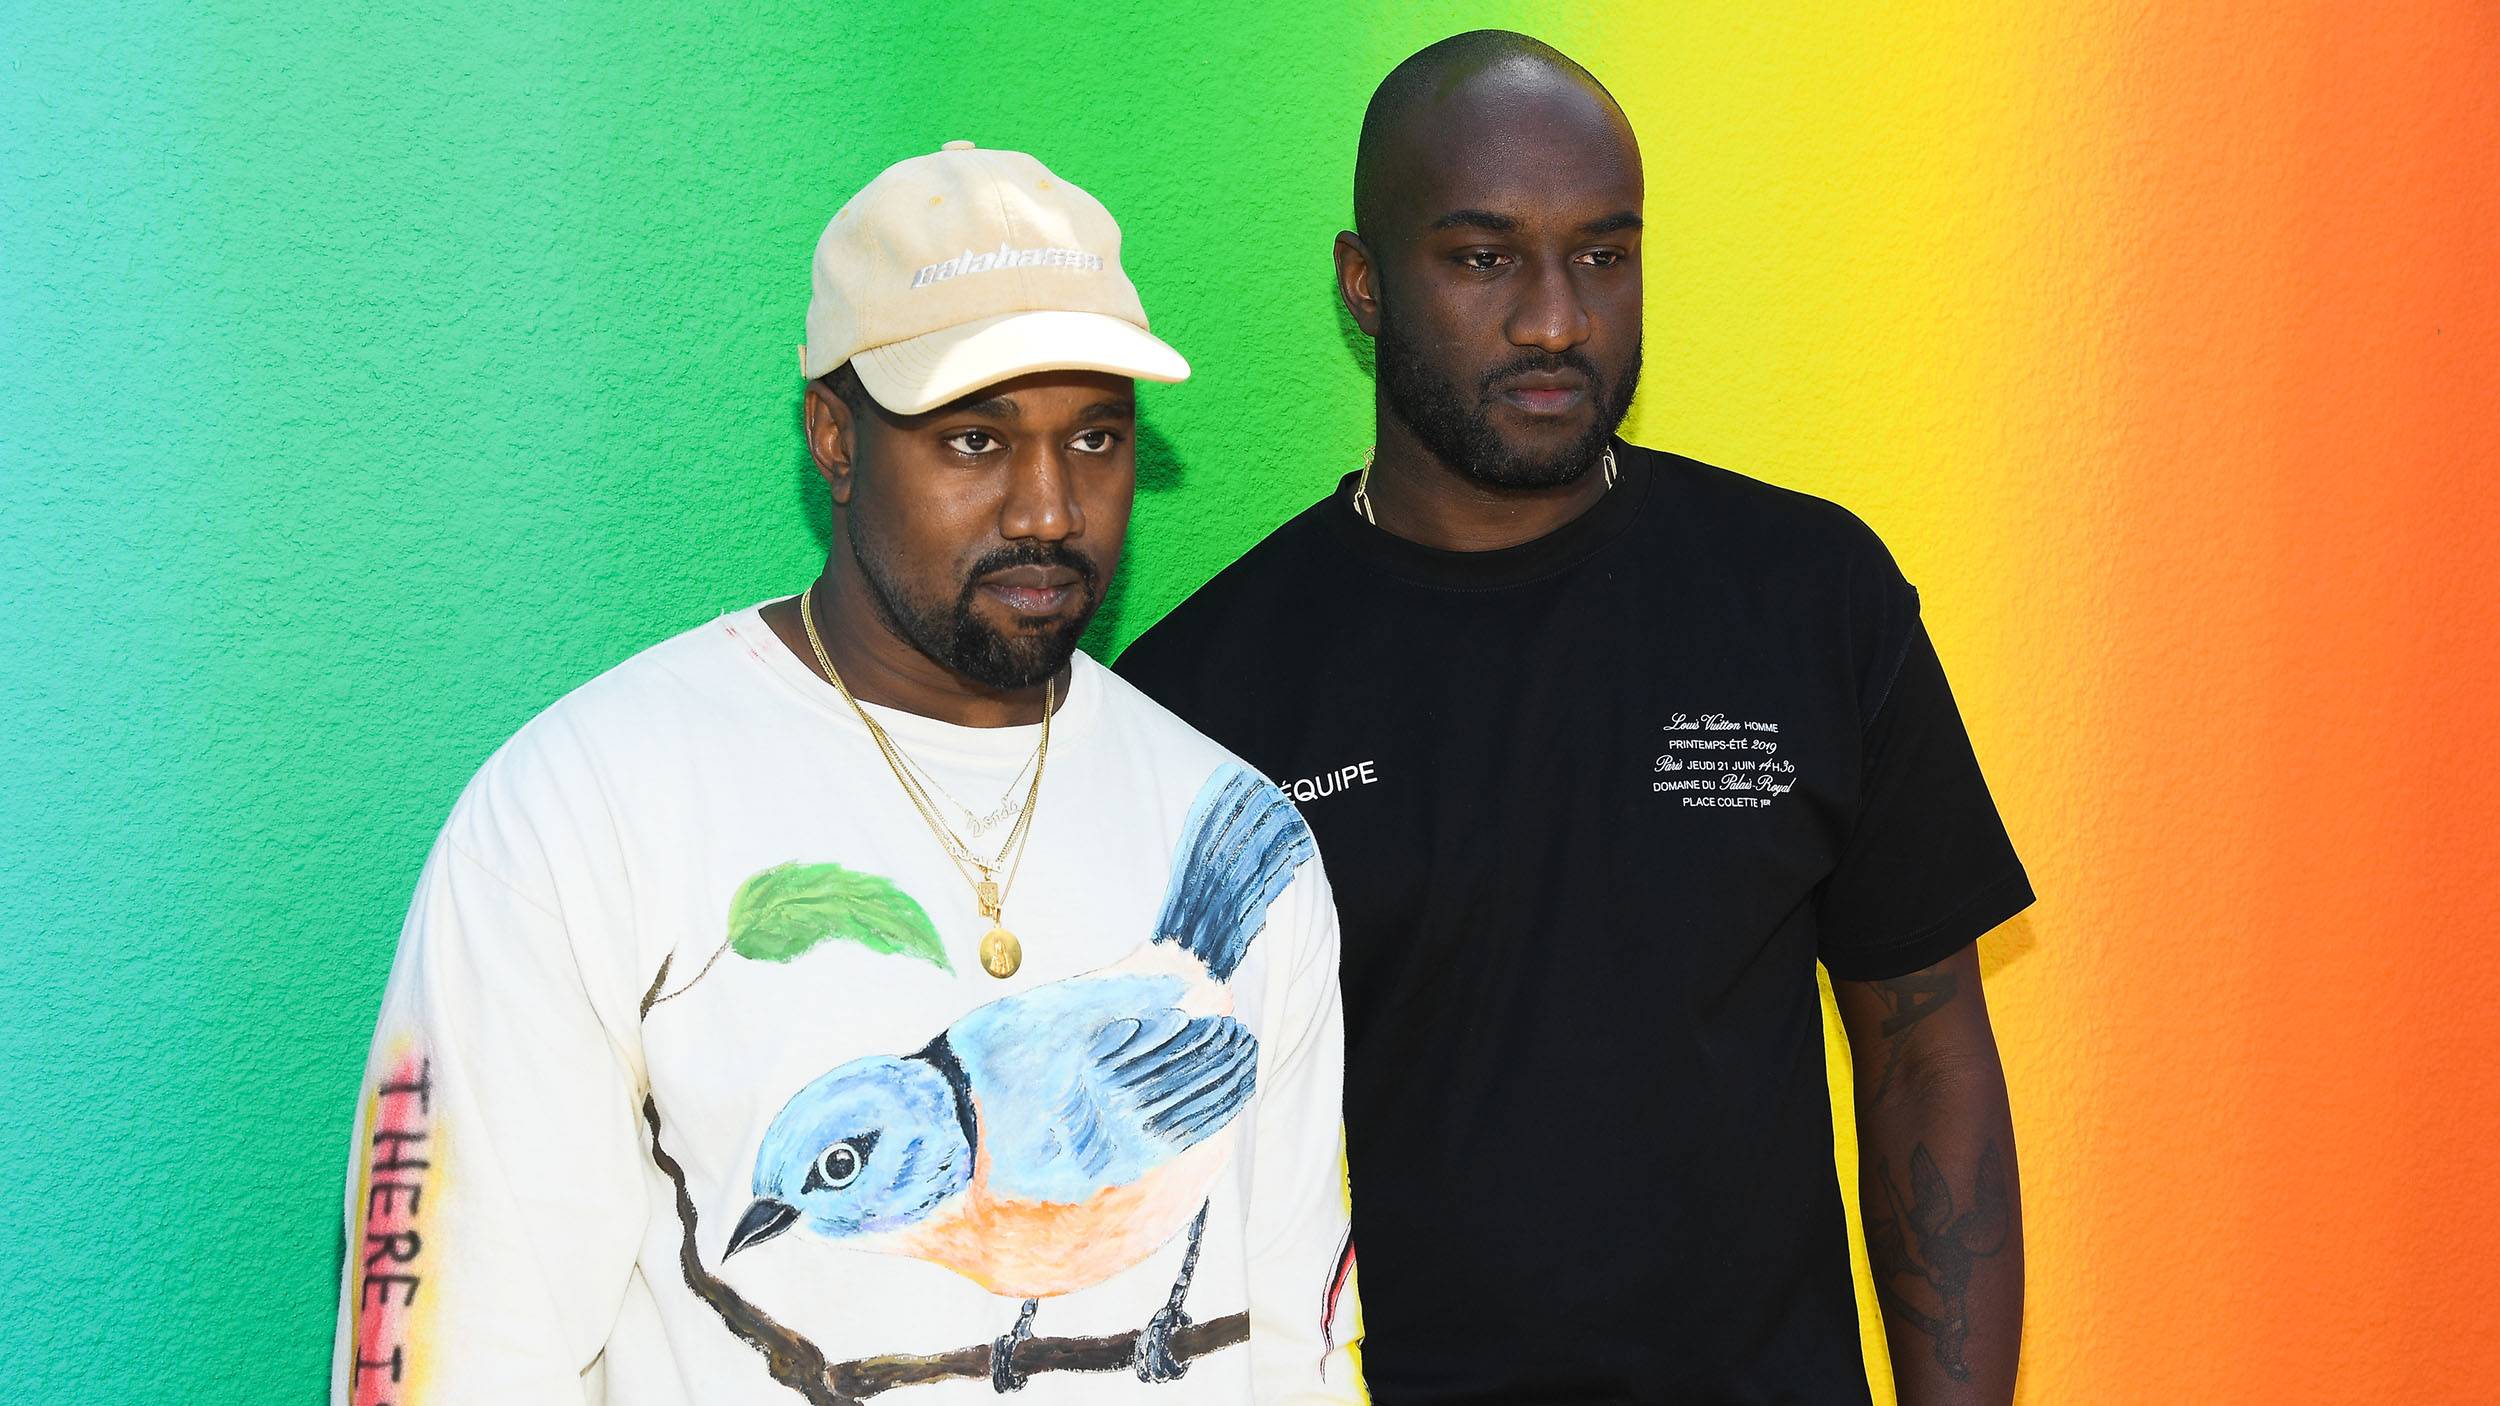 LIVESTREAM: Virgil Abloh Presents His First Collection for Louis Vuitton